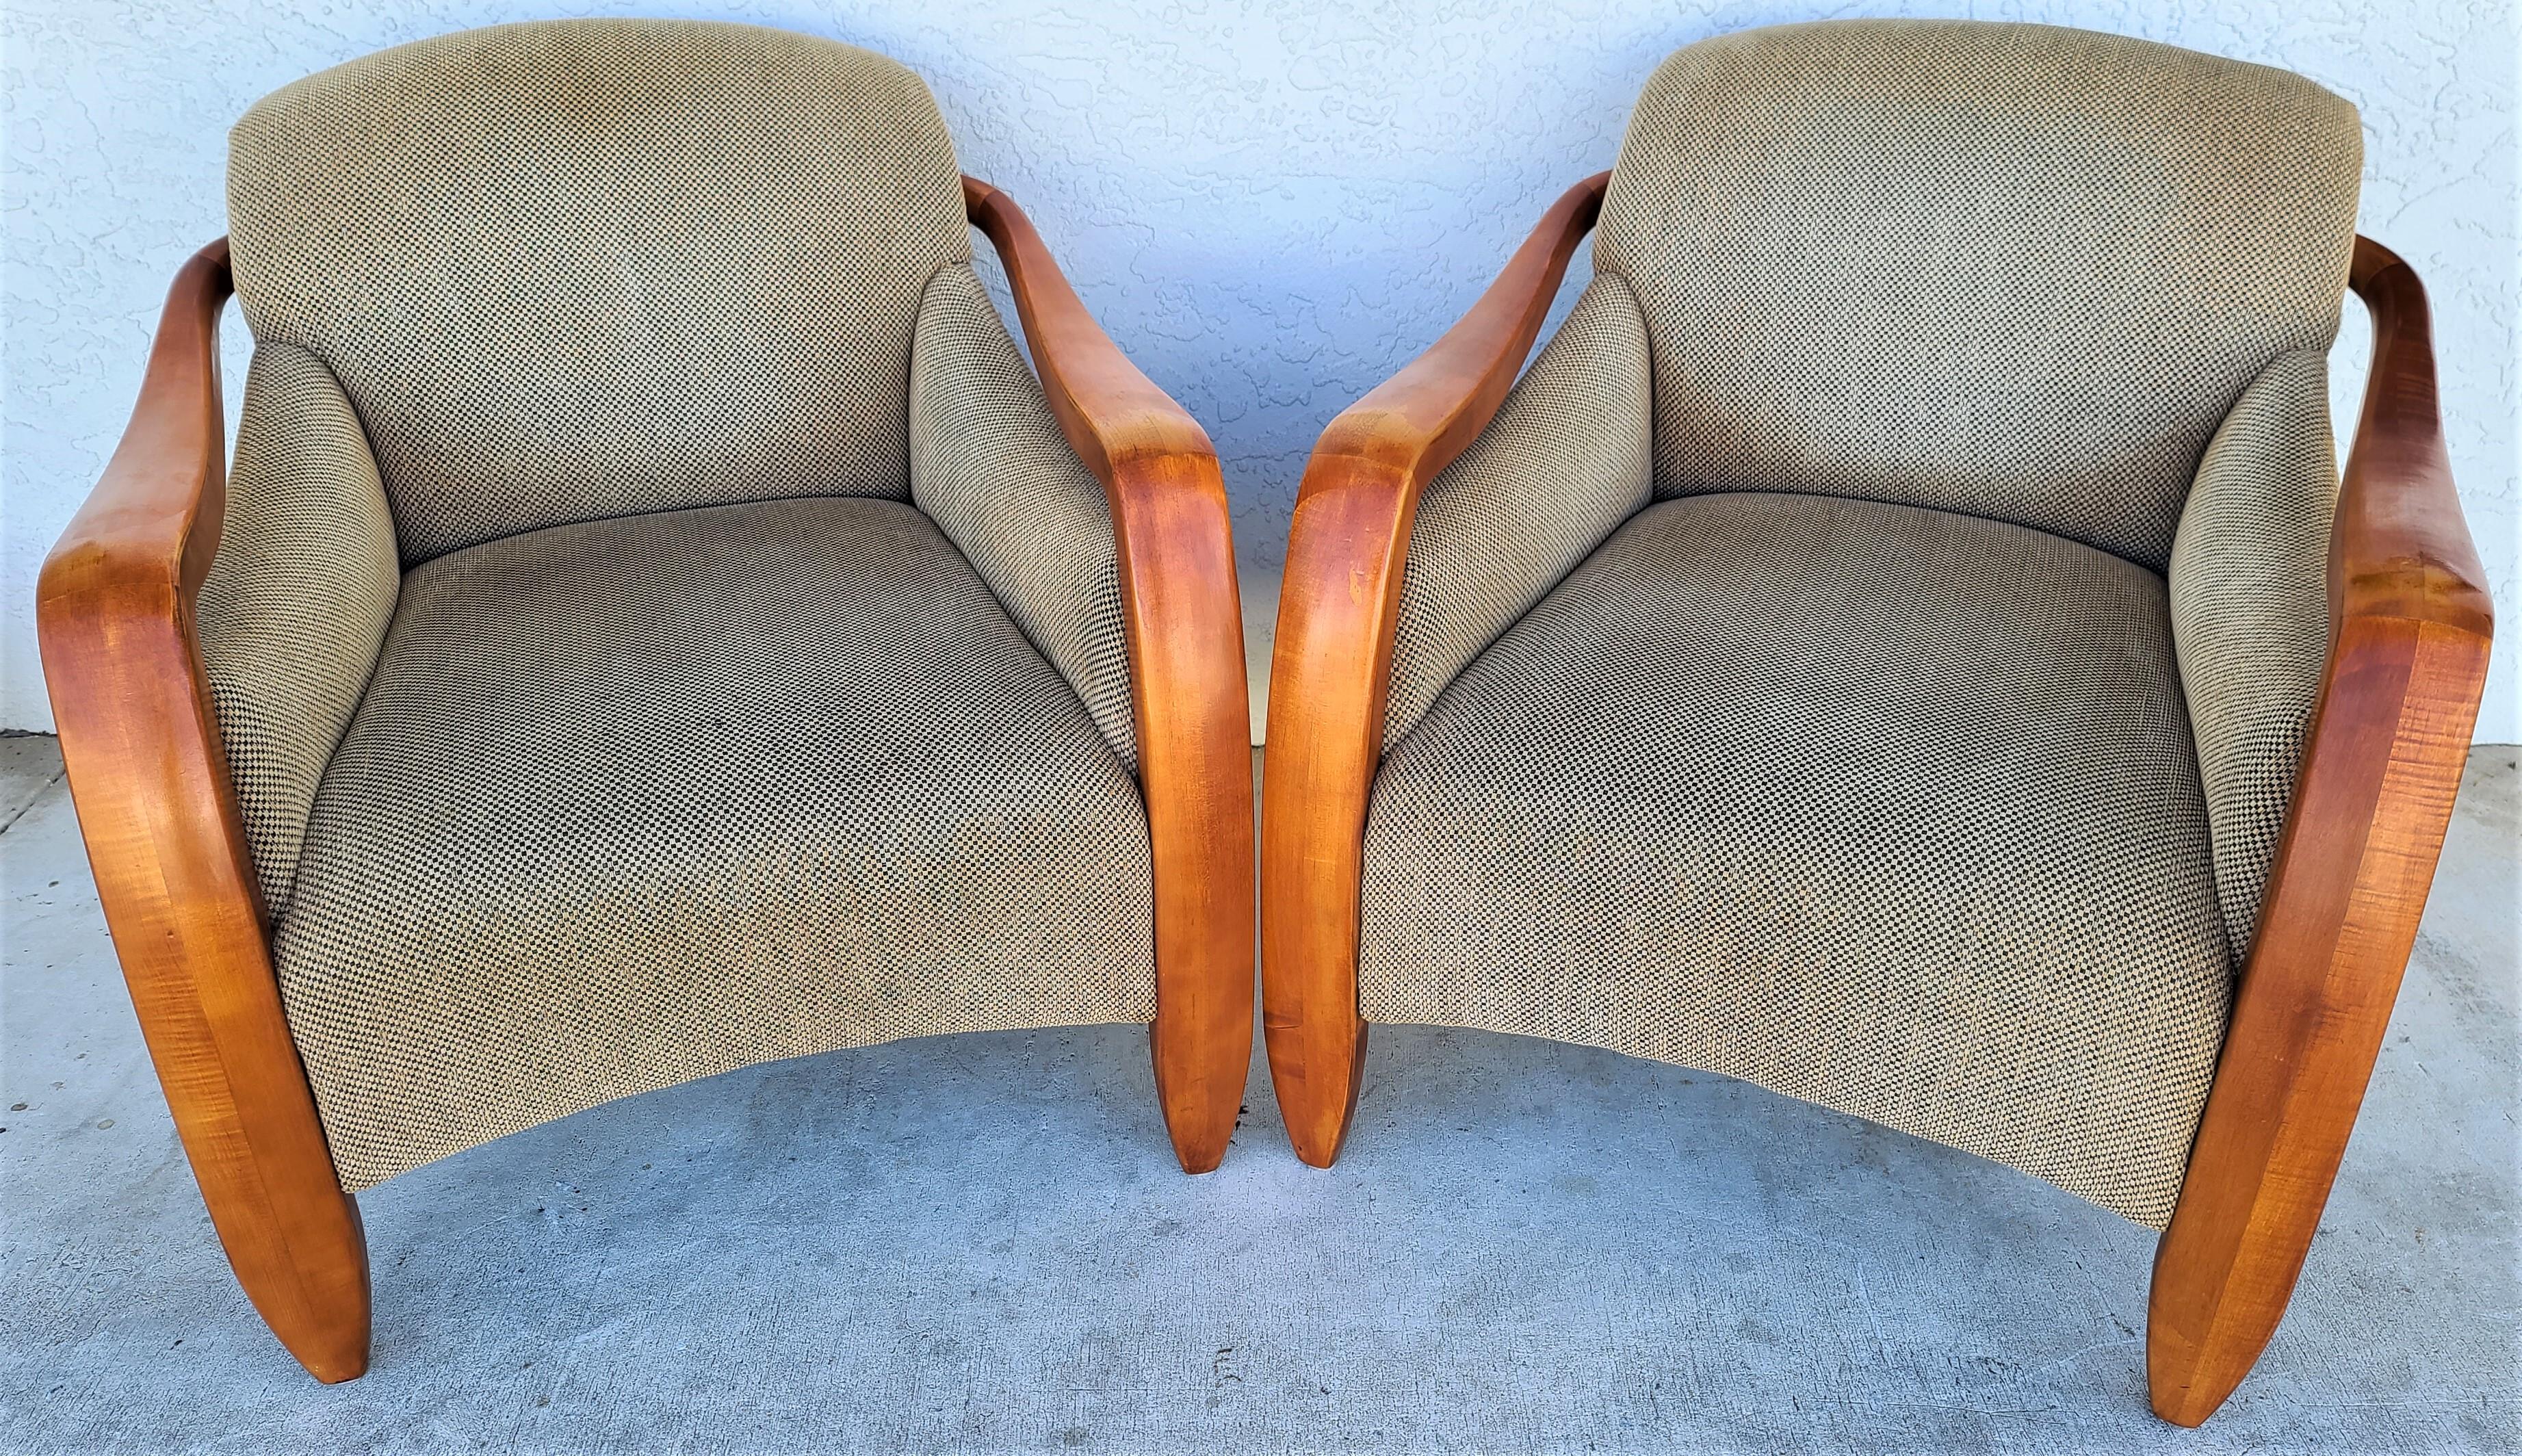 Offering one of our recent Palm Beach Estate fine furniture acquisitions of a
Spectacular pair of Mid-Century Modern upholstered lounge chairs
These are very comfortable, large, and well-built chairs with spring-supported seats.

Approximate